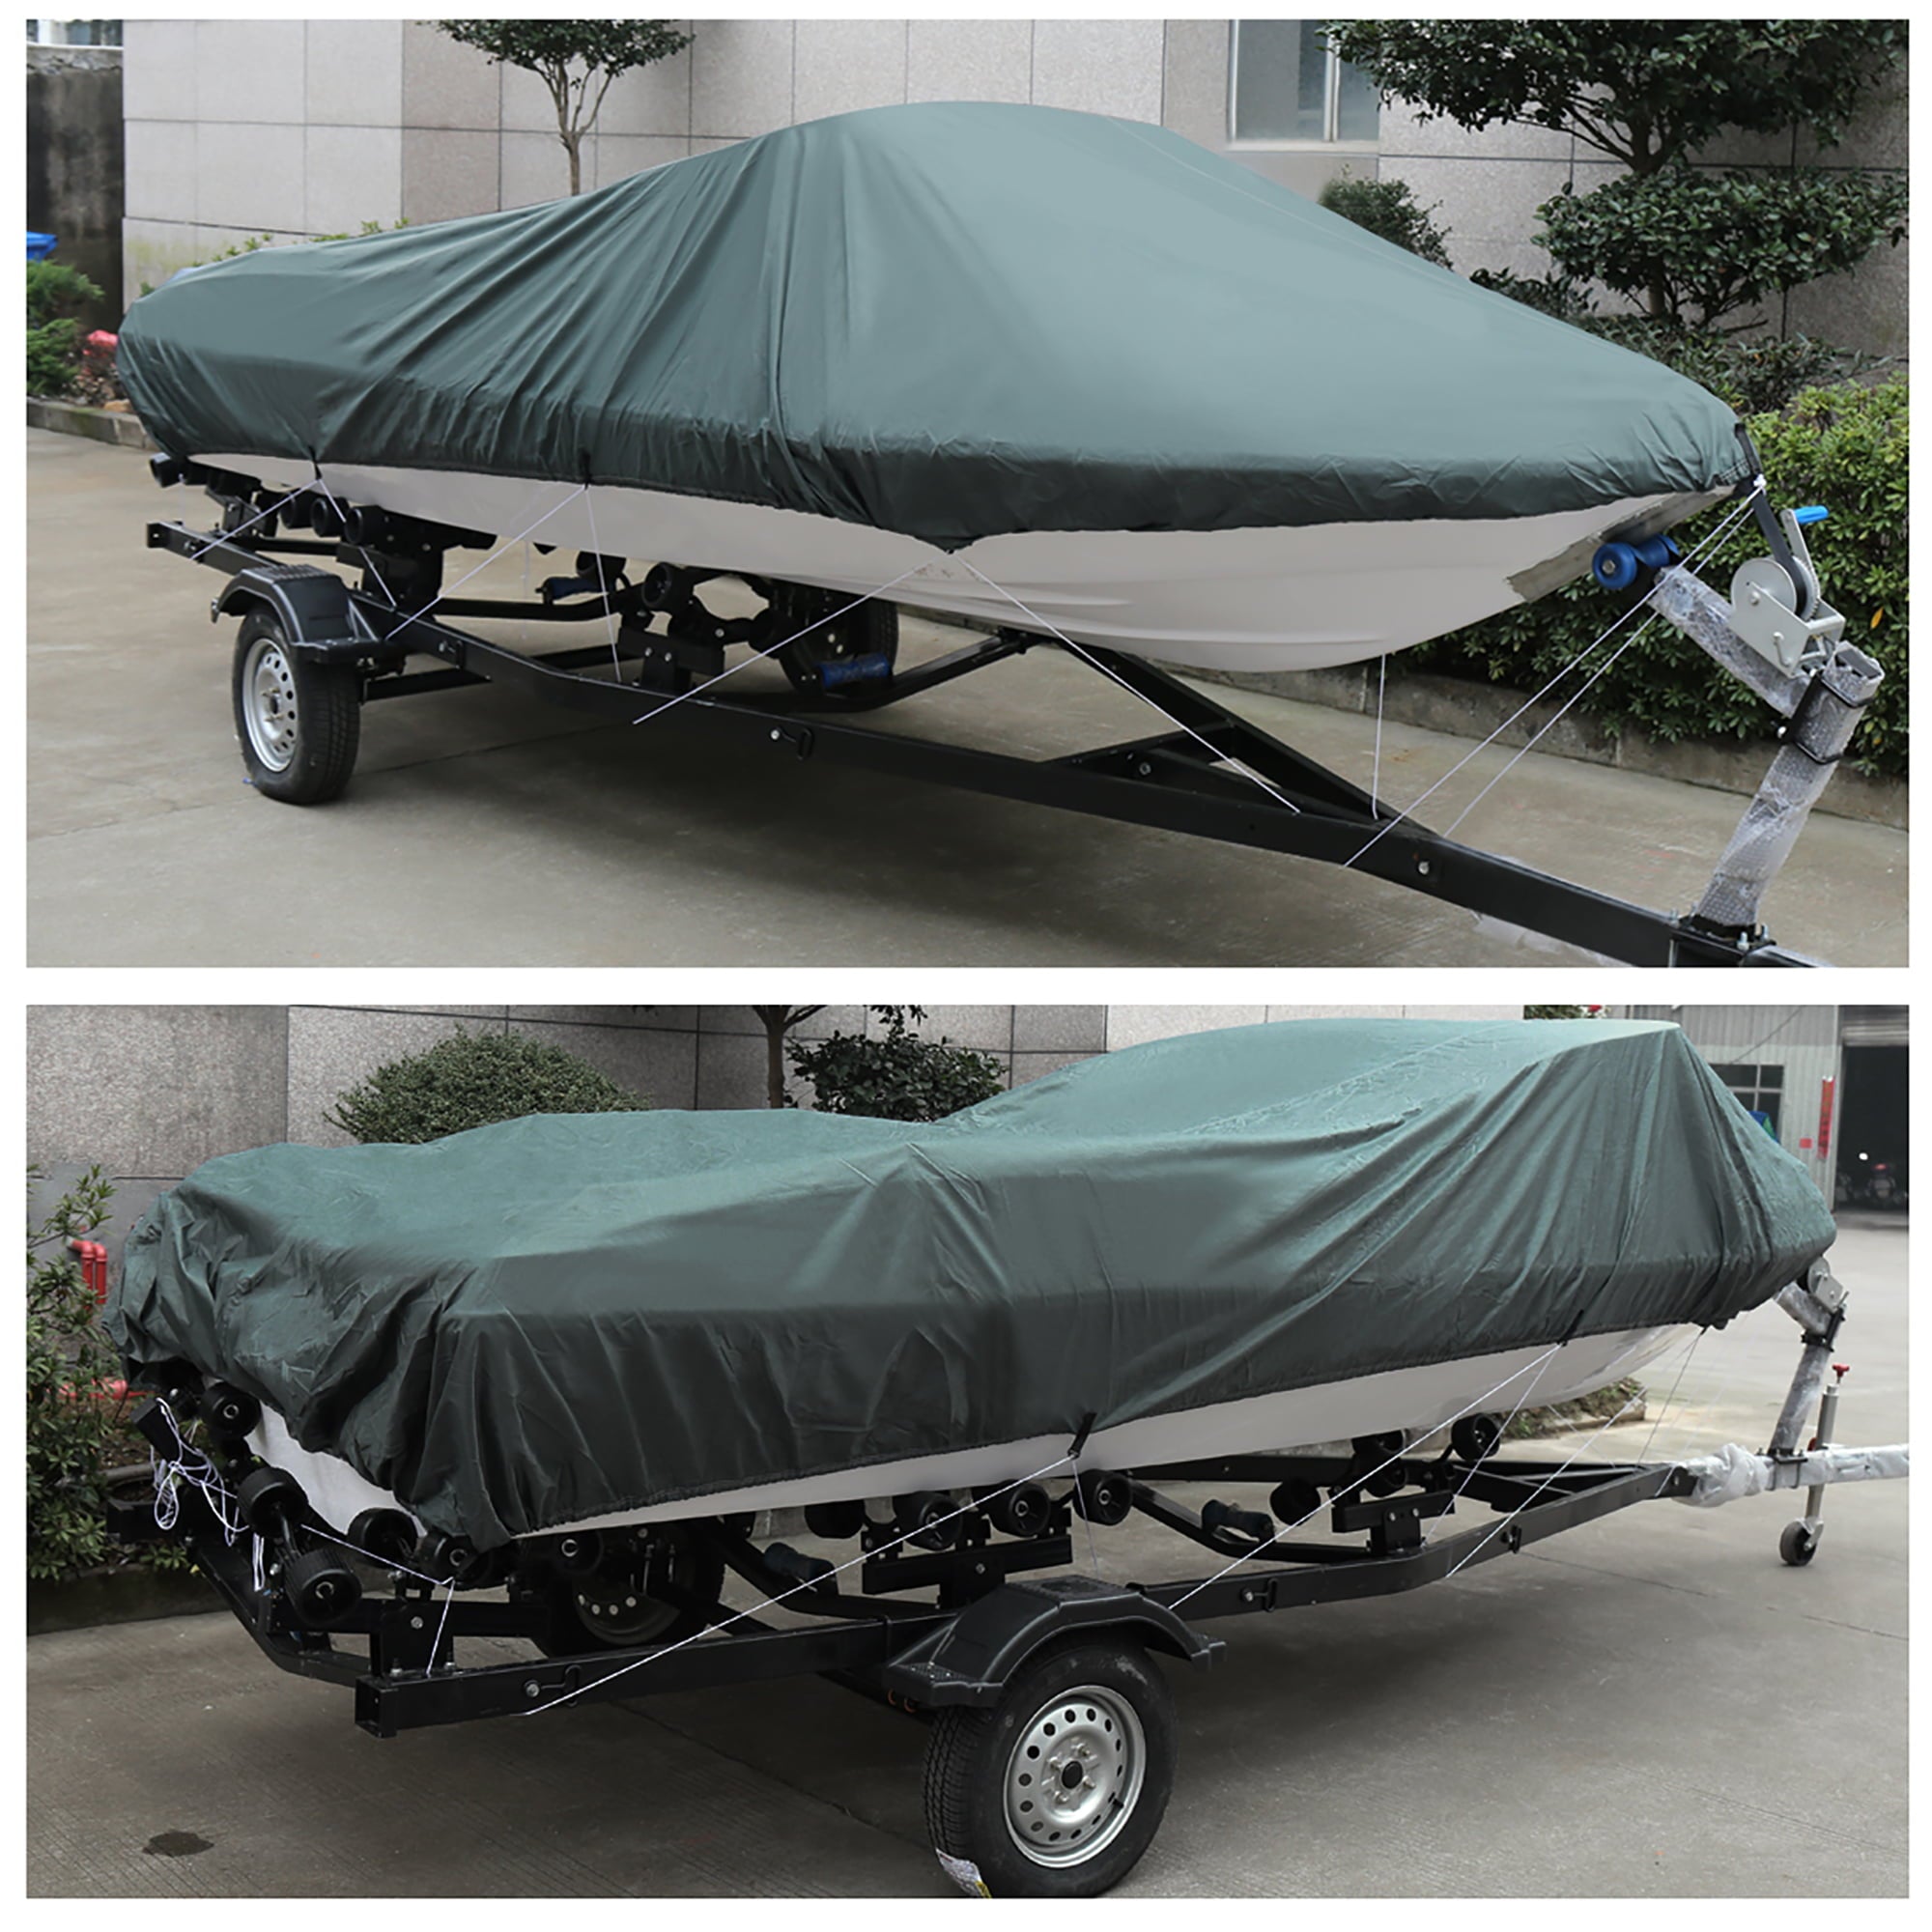 V-Hull 210-Denier Waterproof Boat Cover for 14'-16' Trailerable Fishing Ski Boats Runabout Covers Gray